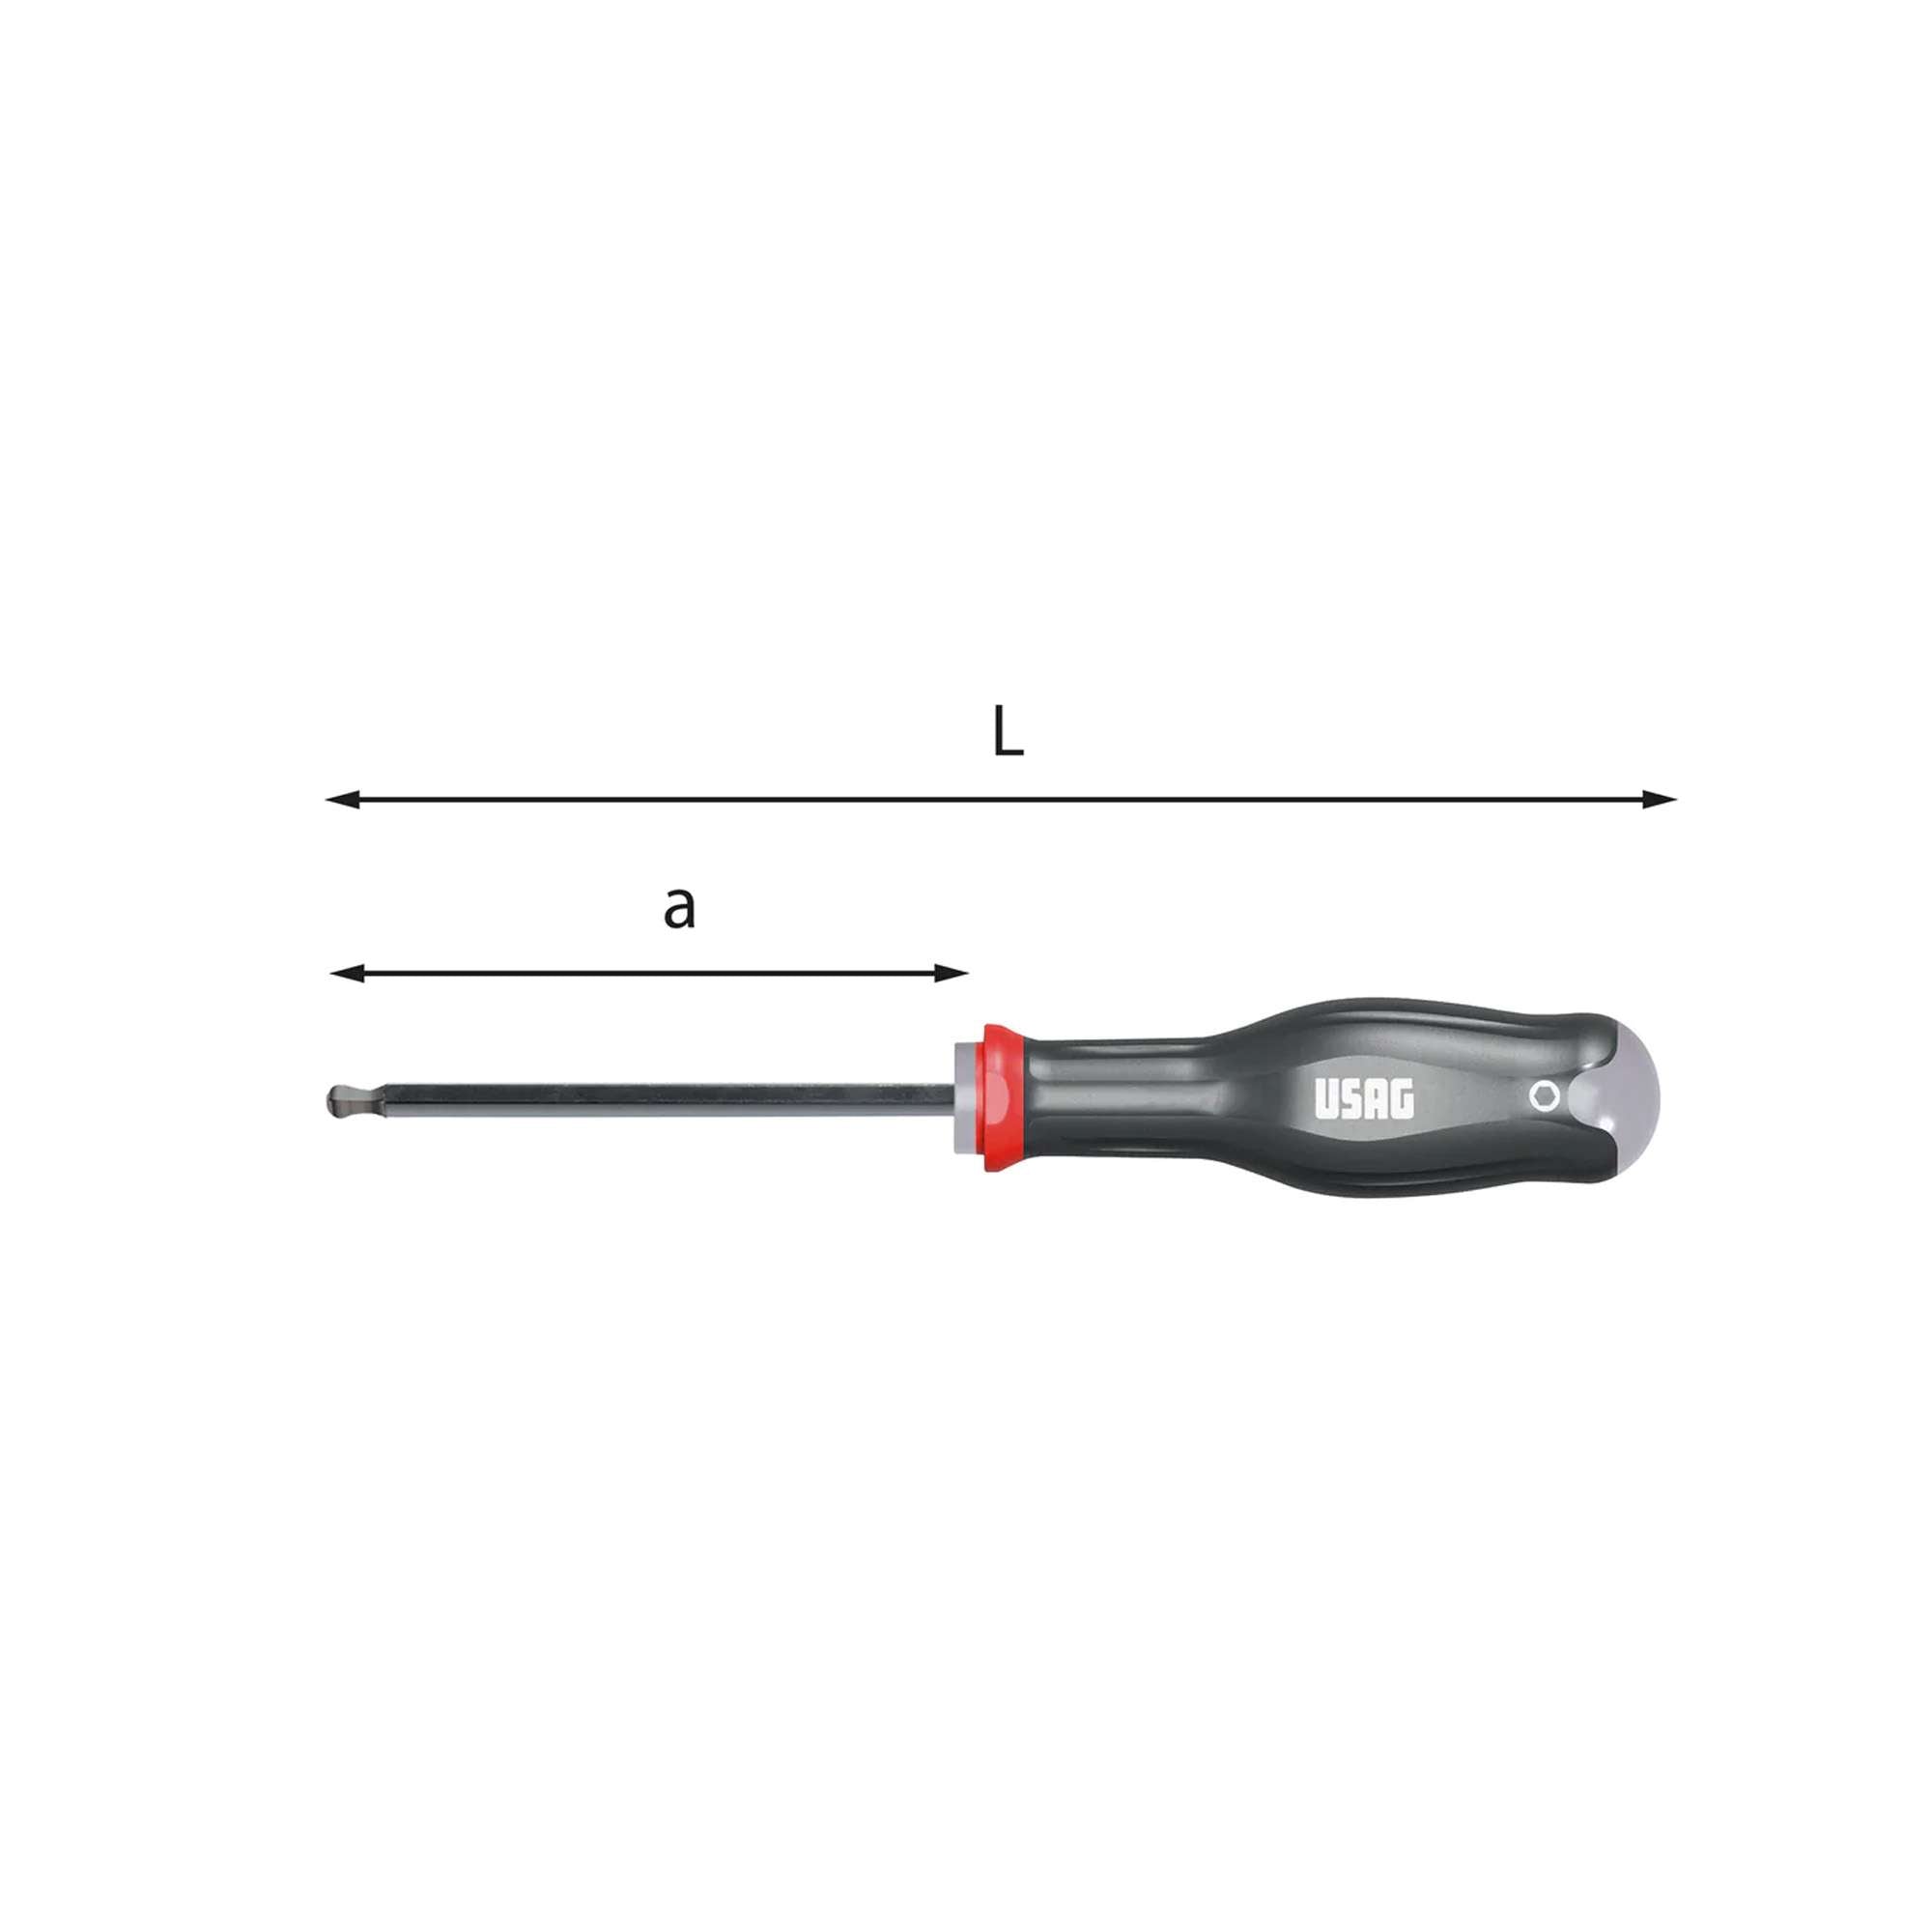 Screwdrivers with spherical head and handgrip (2-2,5-3-4) - Usag 280 TS